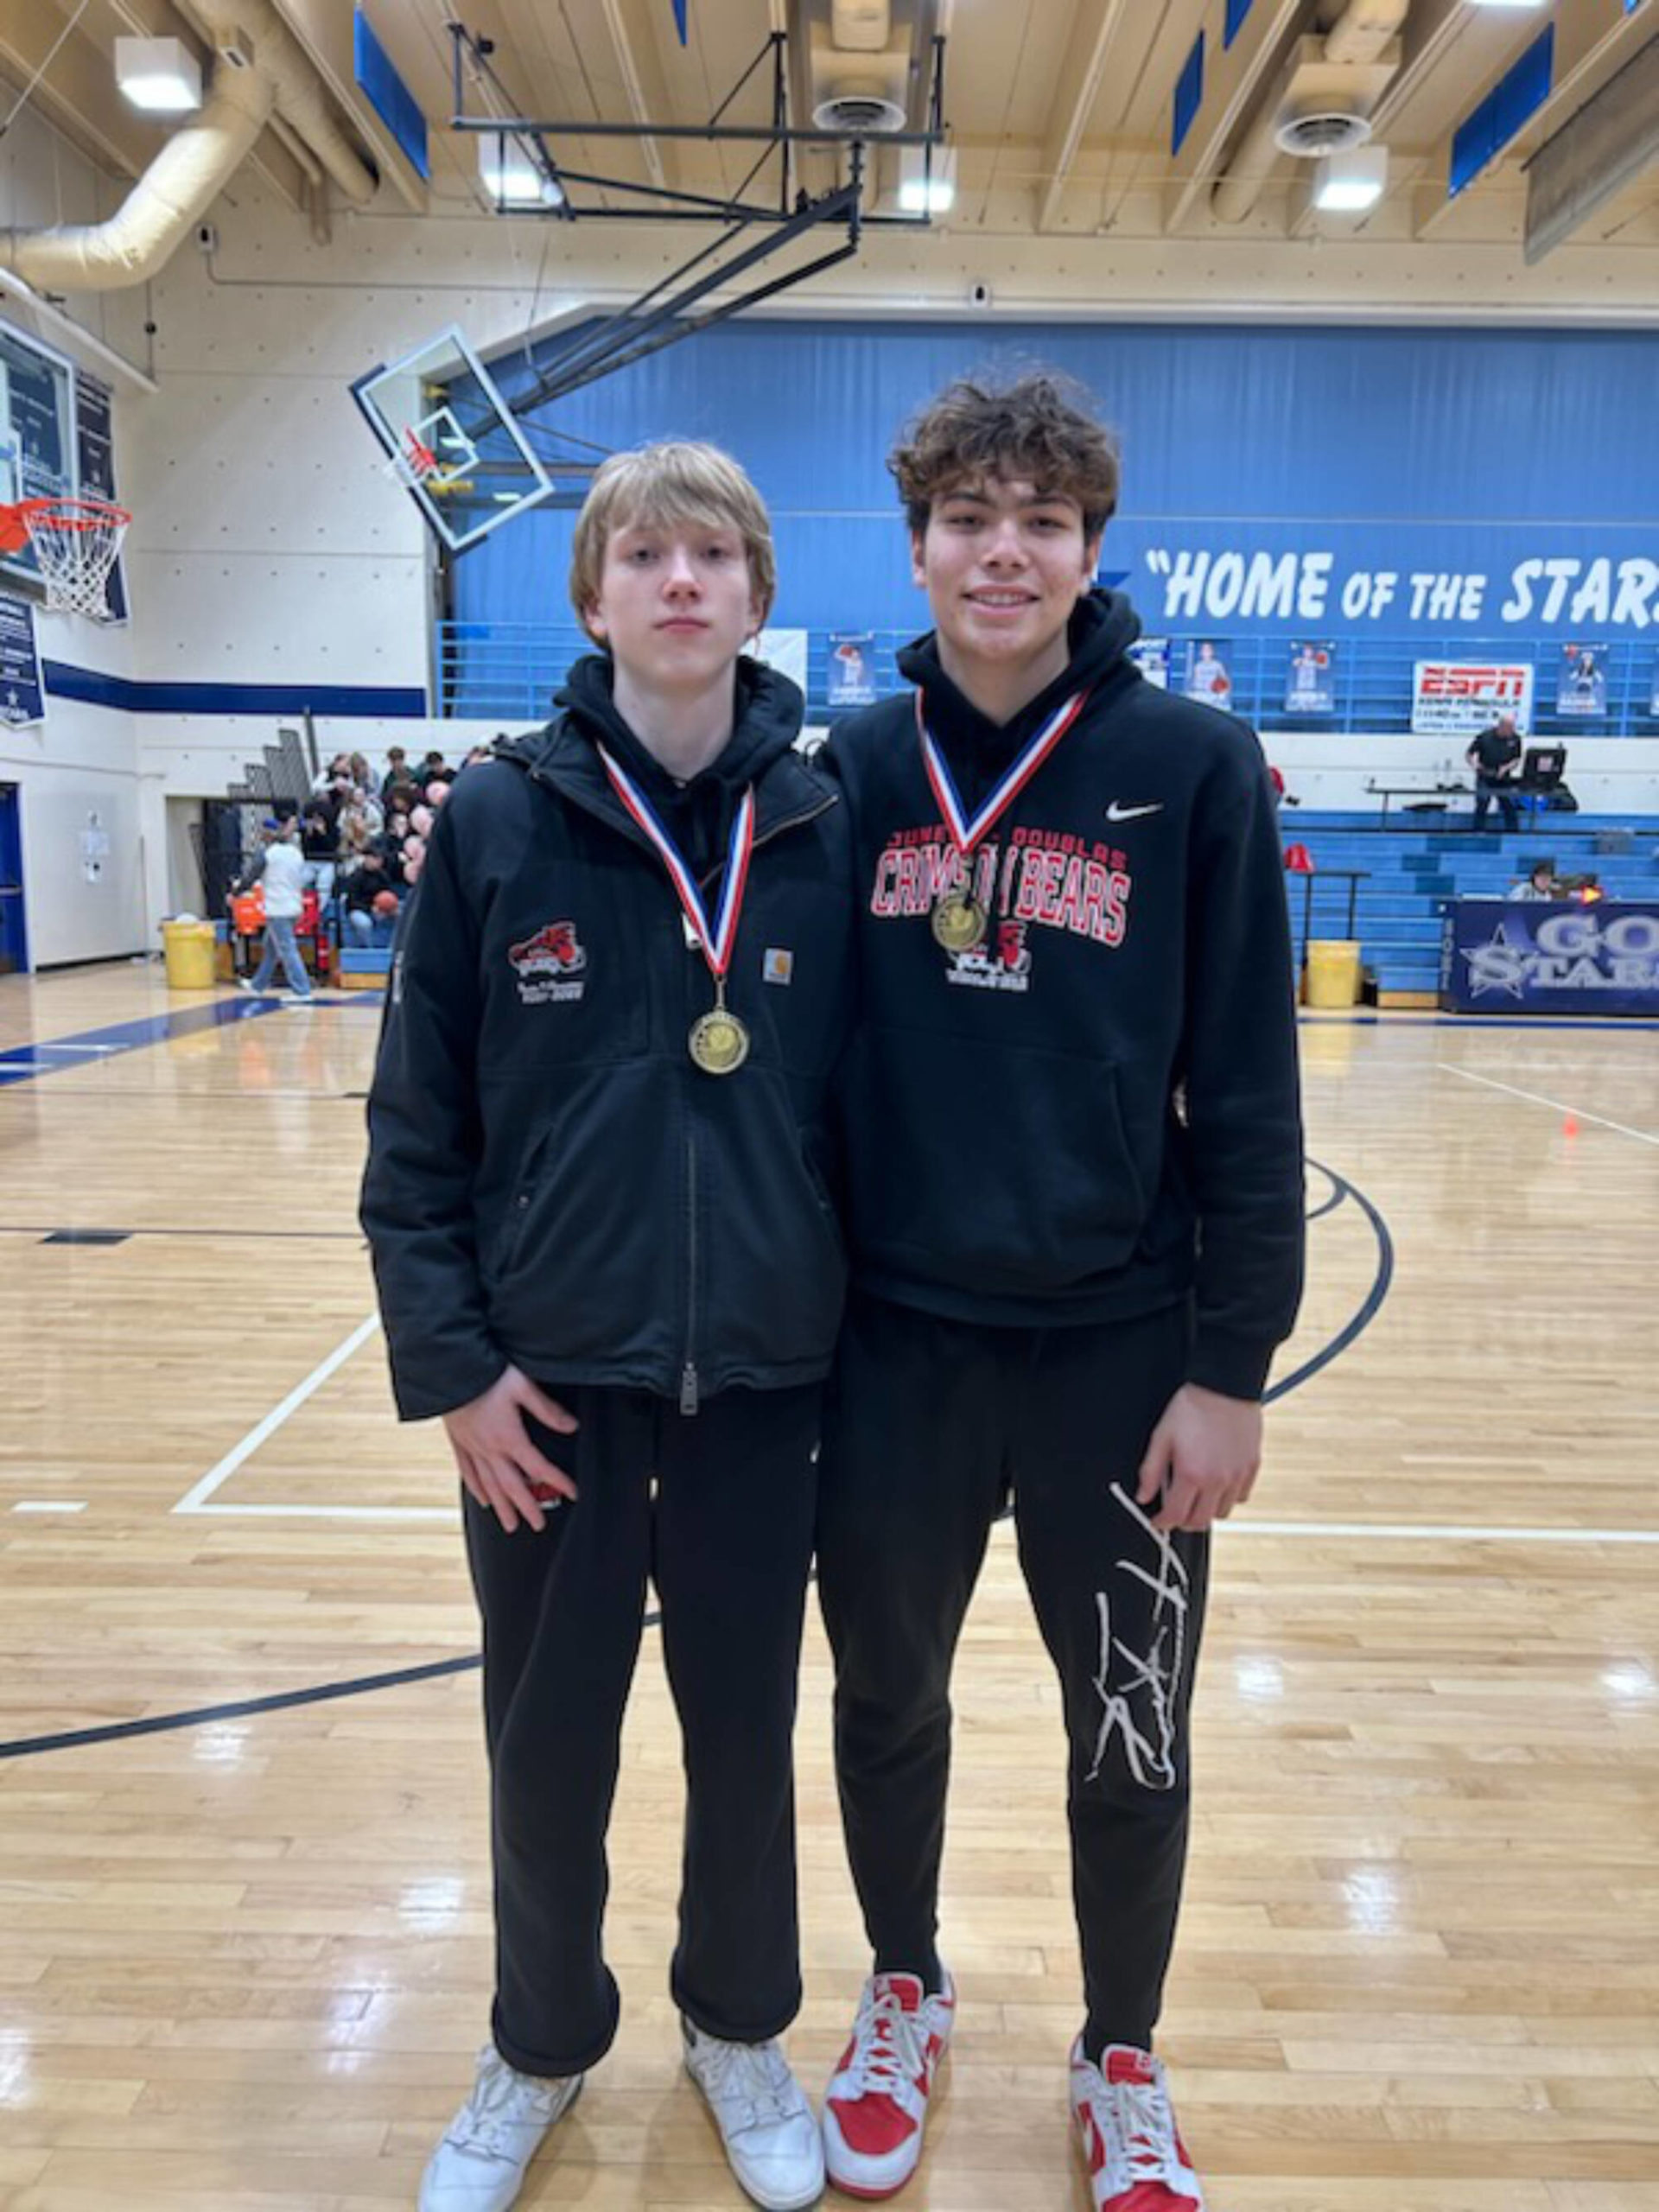 JDHS junior Sean Oliver and senior Orion Dybdahl share all-tournament honors at the conclusion of this year’s 3-game Al Howard Shootout tournament in Soldotna. (Courtesy Photo / Robert Casperson)